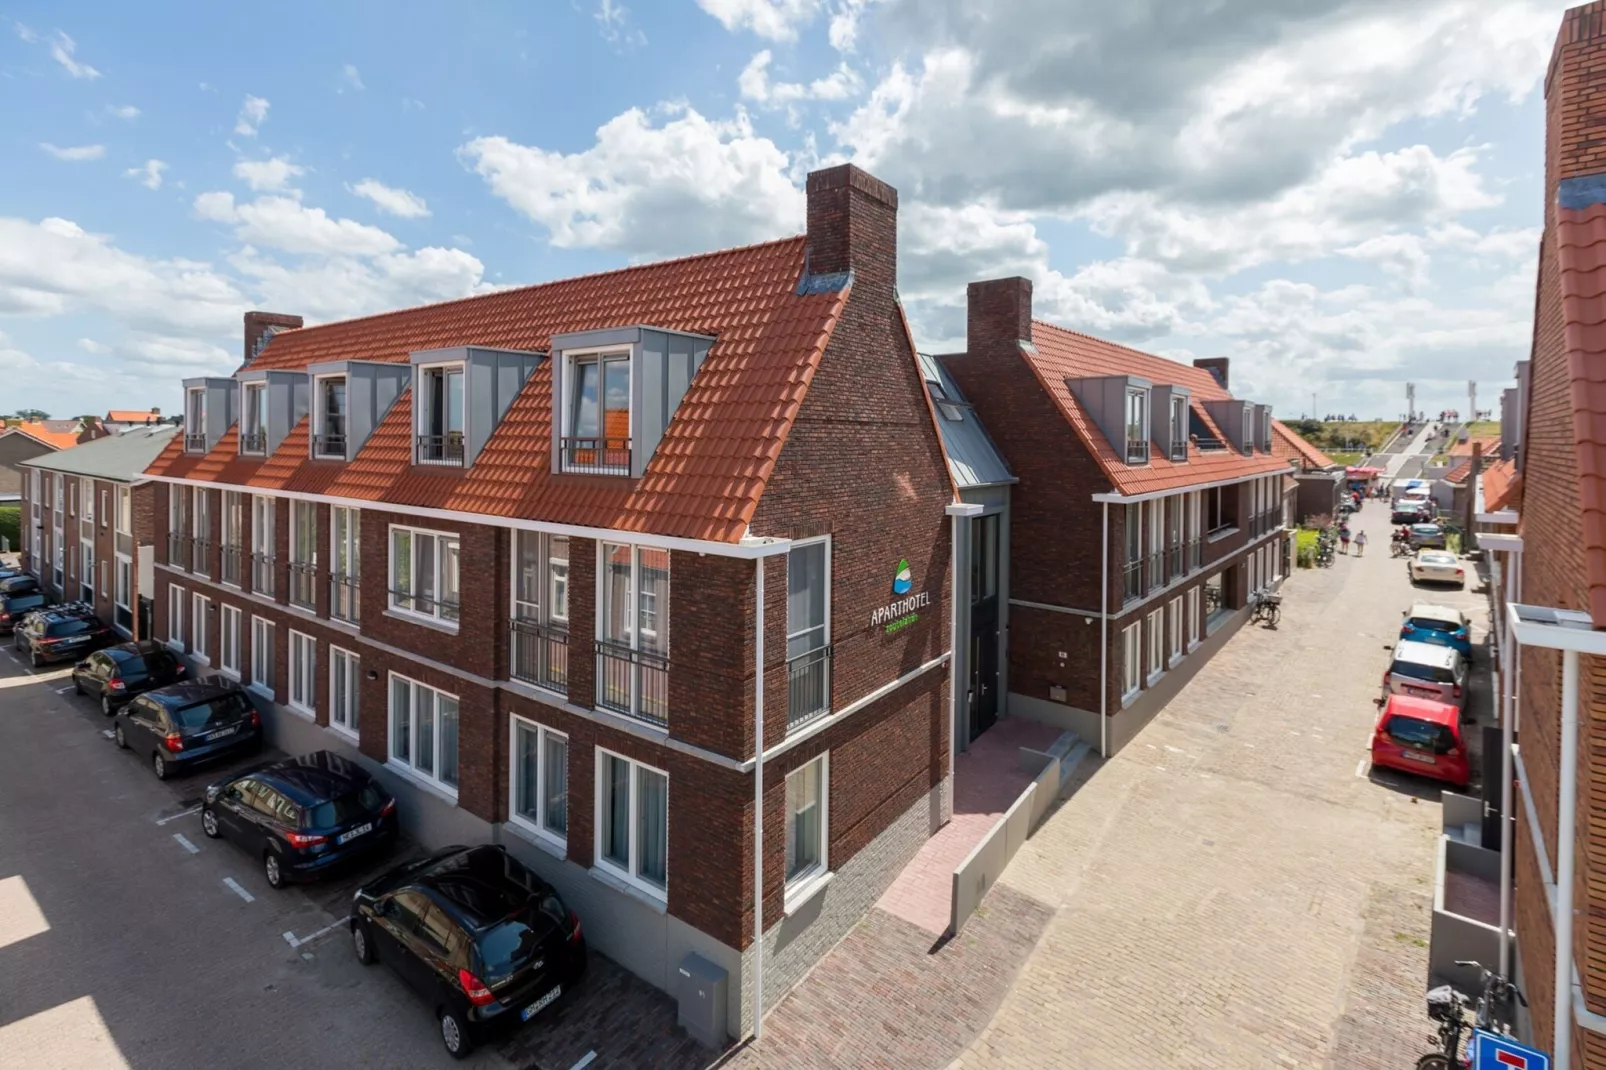 Aparthotel Zoutelande - 4 pers luxe appartement - huisdier-Buitenkant zomer